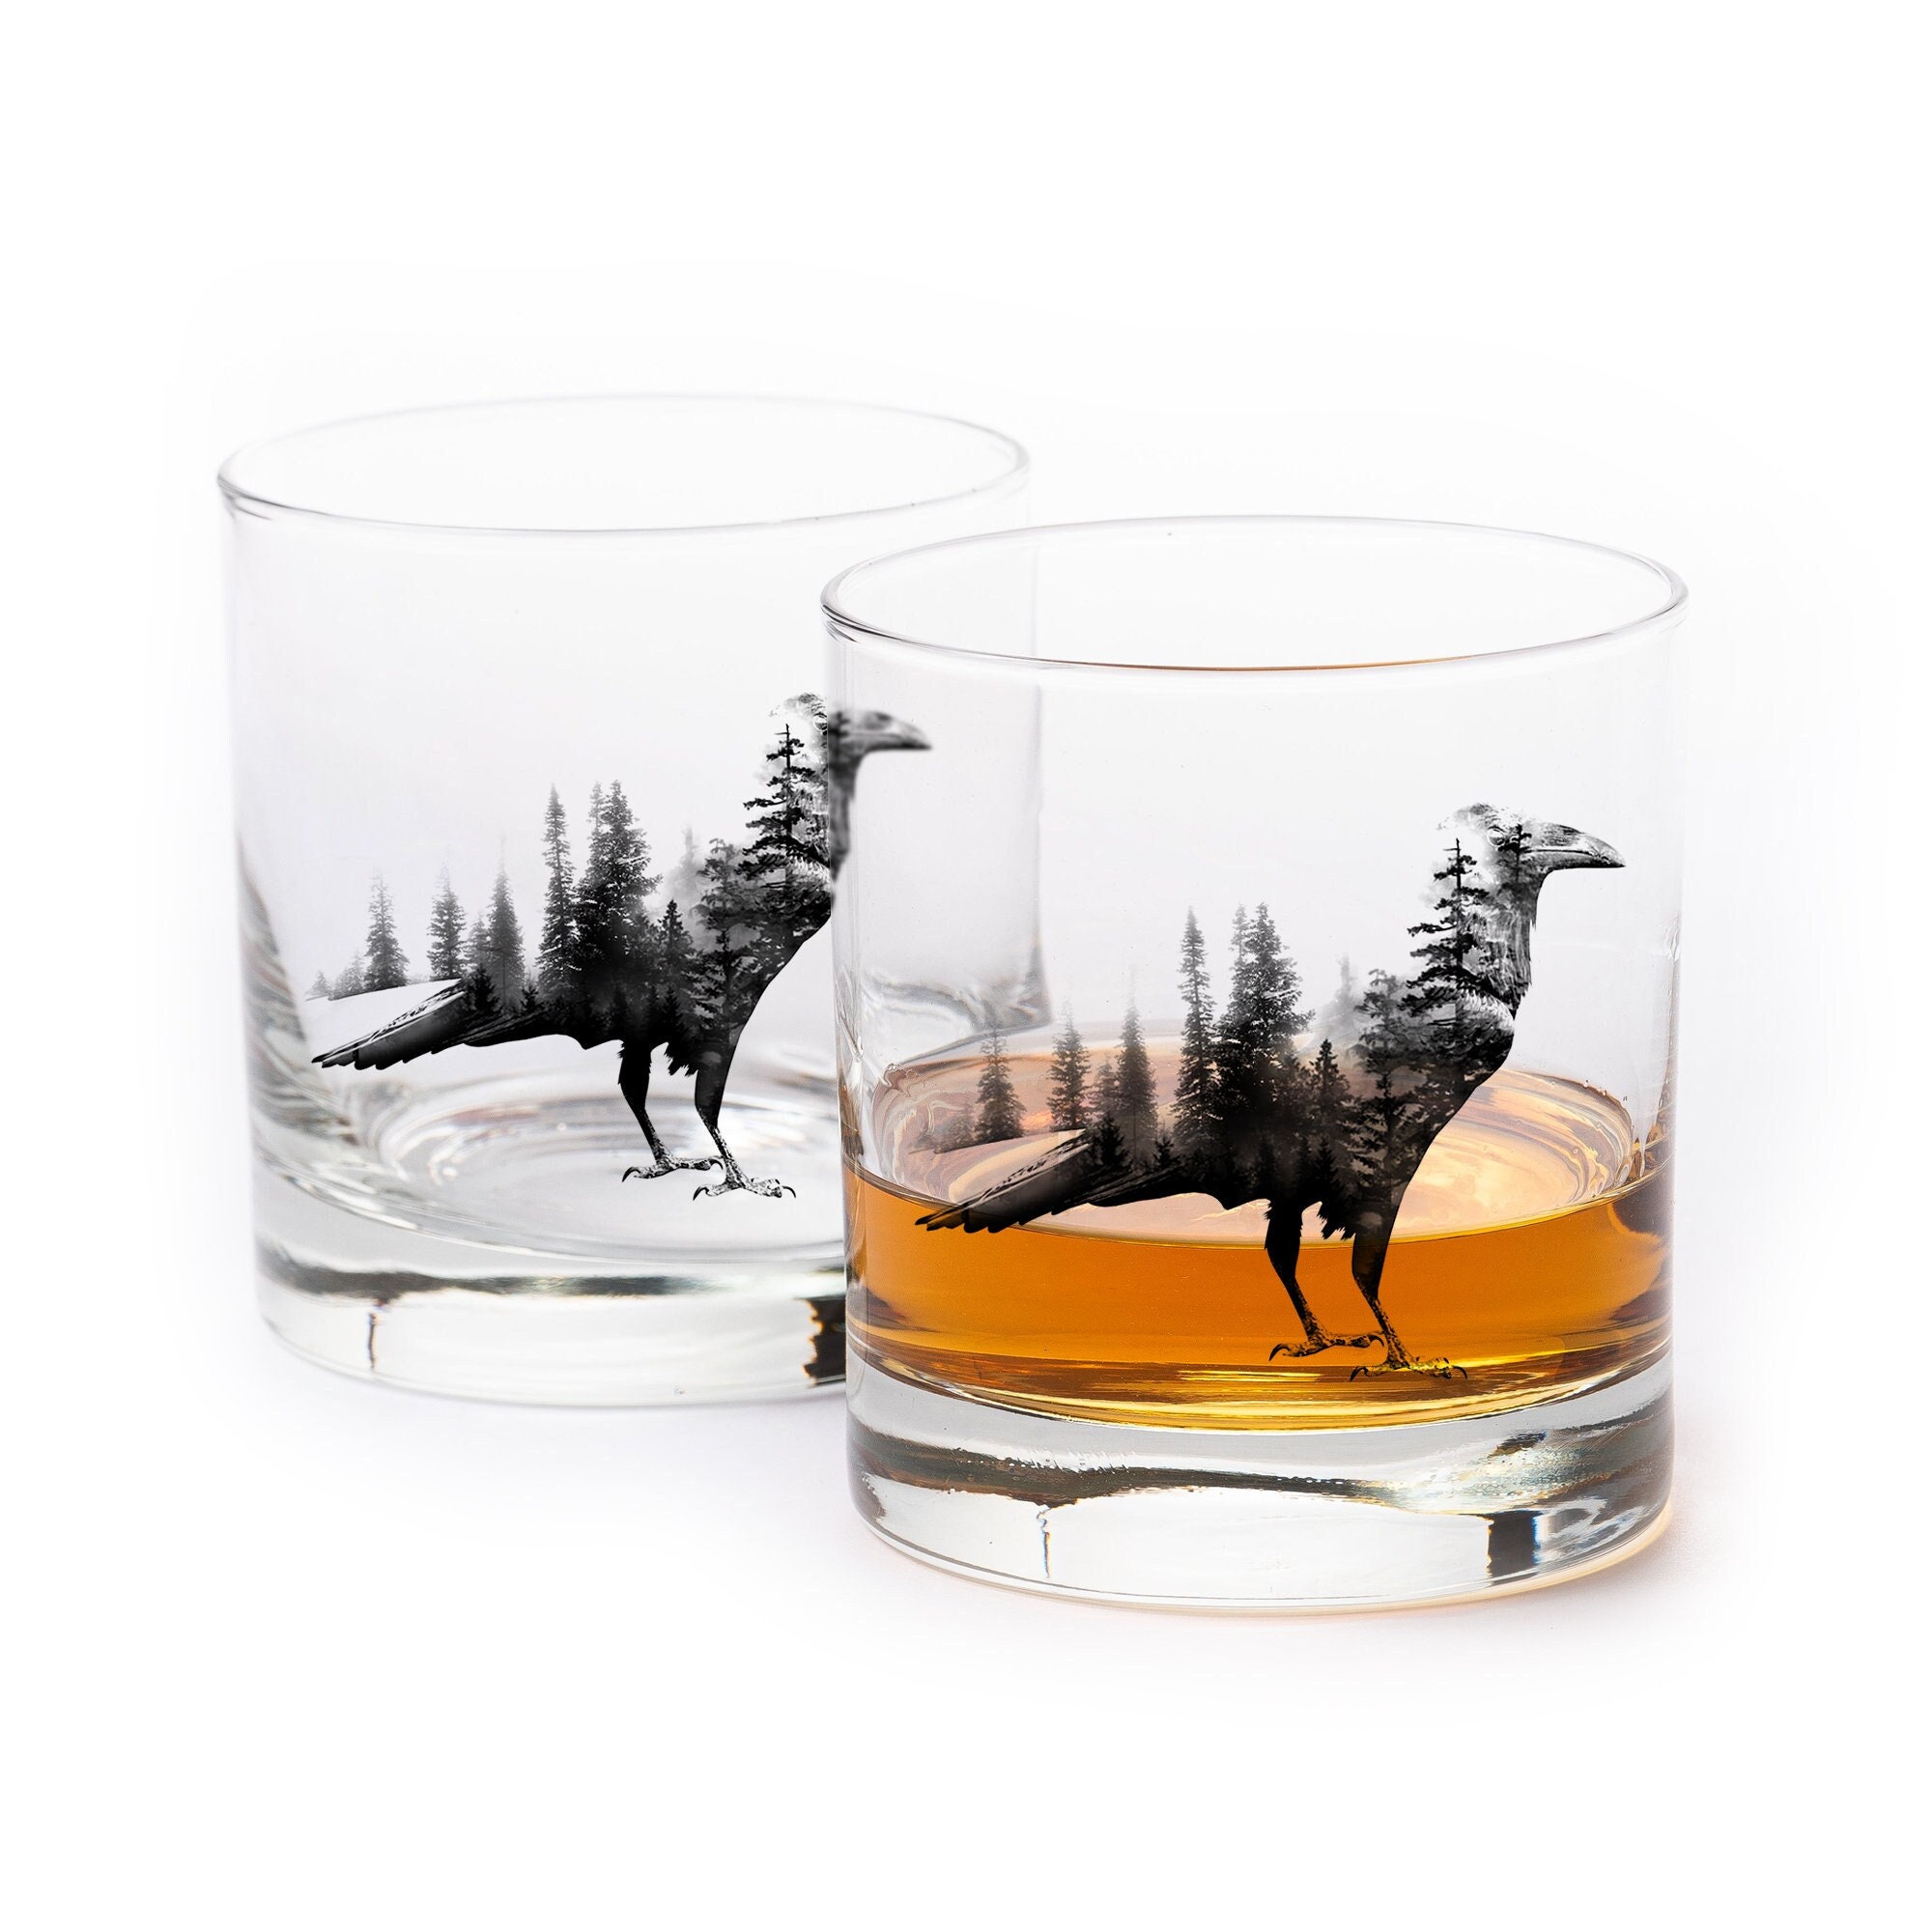 Frosted Bottom Heavy Based Whisky Glass